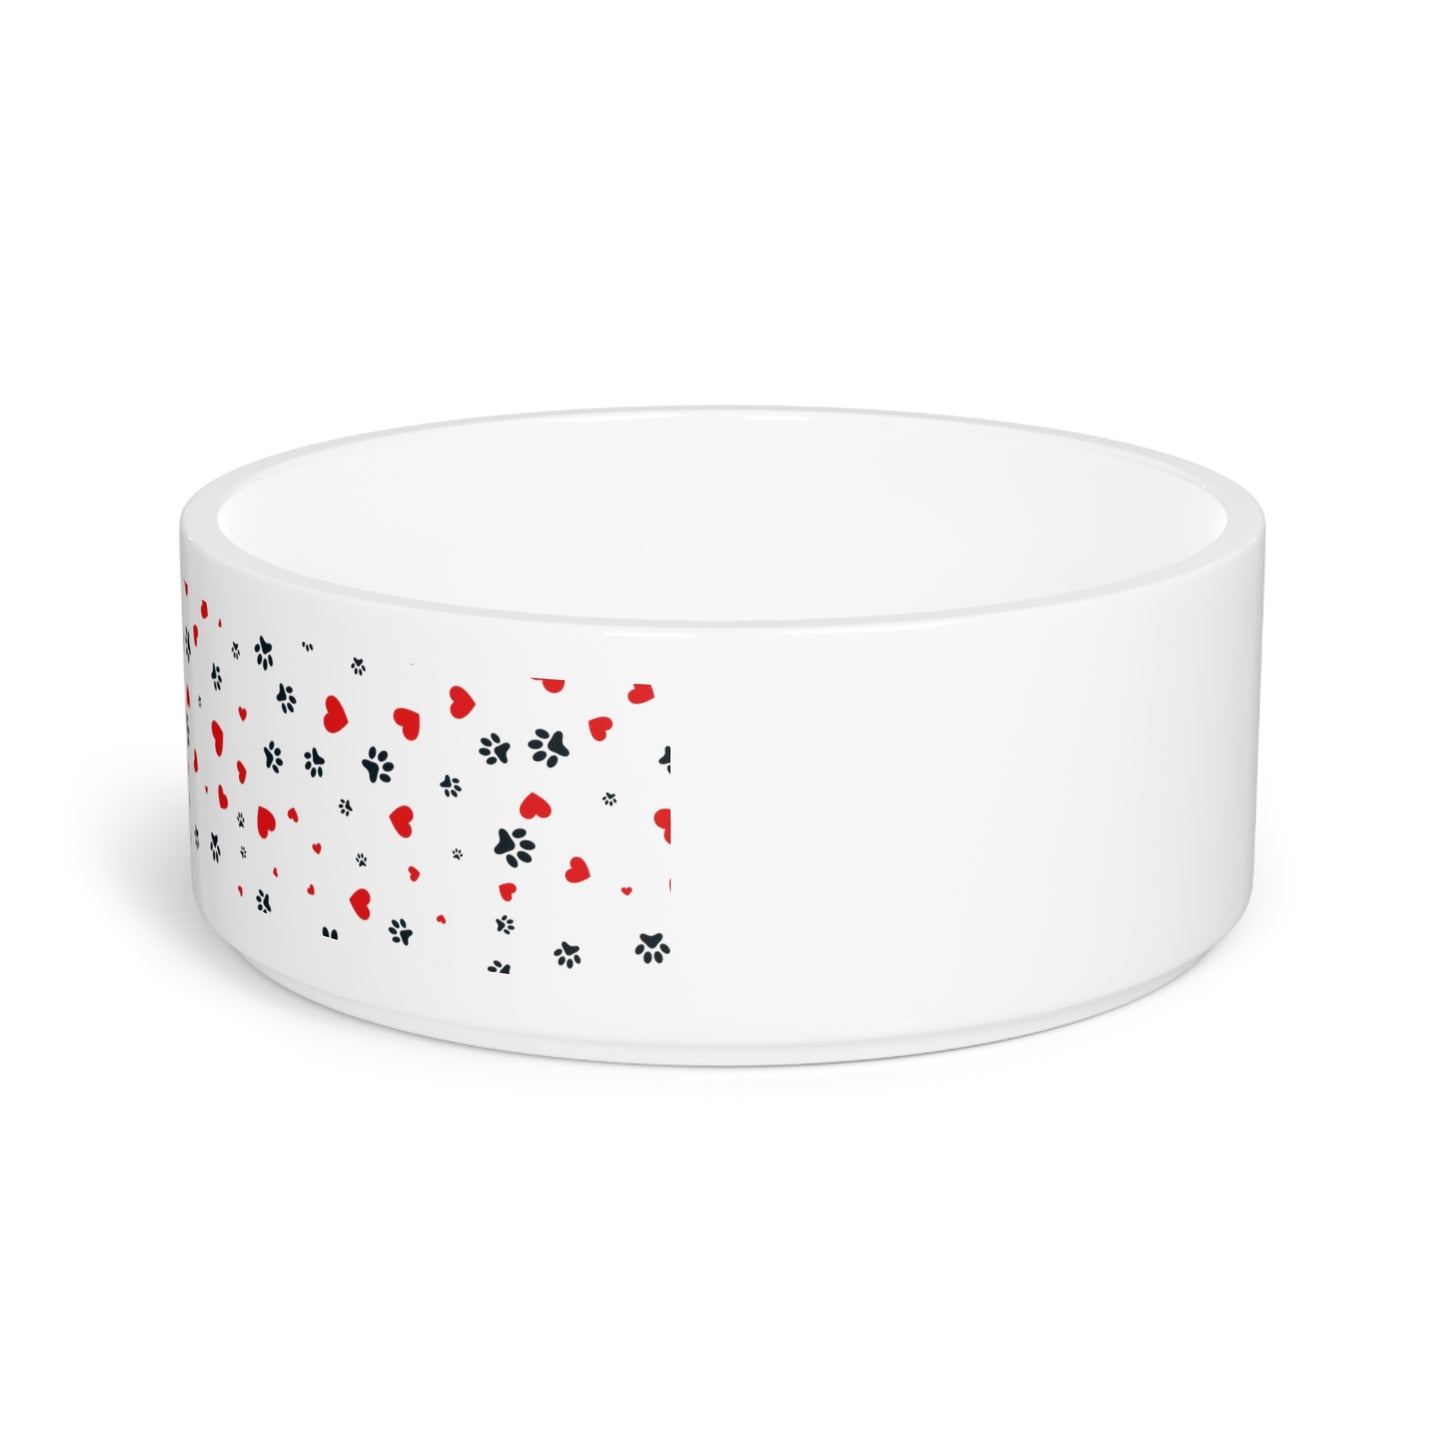 Niccie Paws and Hearts Pet Bowl: Stylish, Durable, and Functional